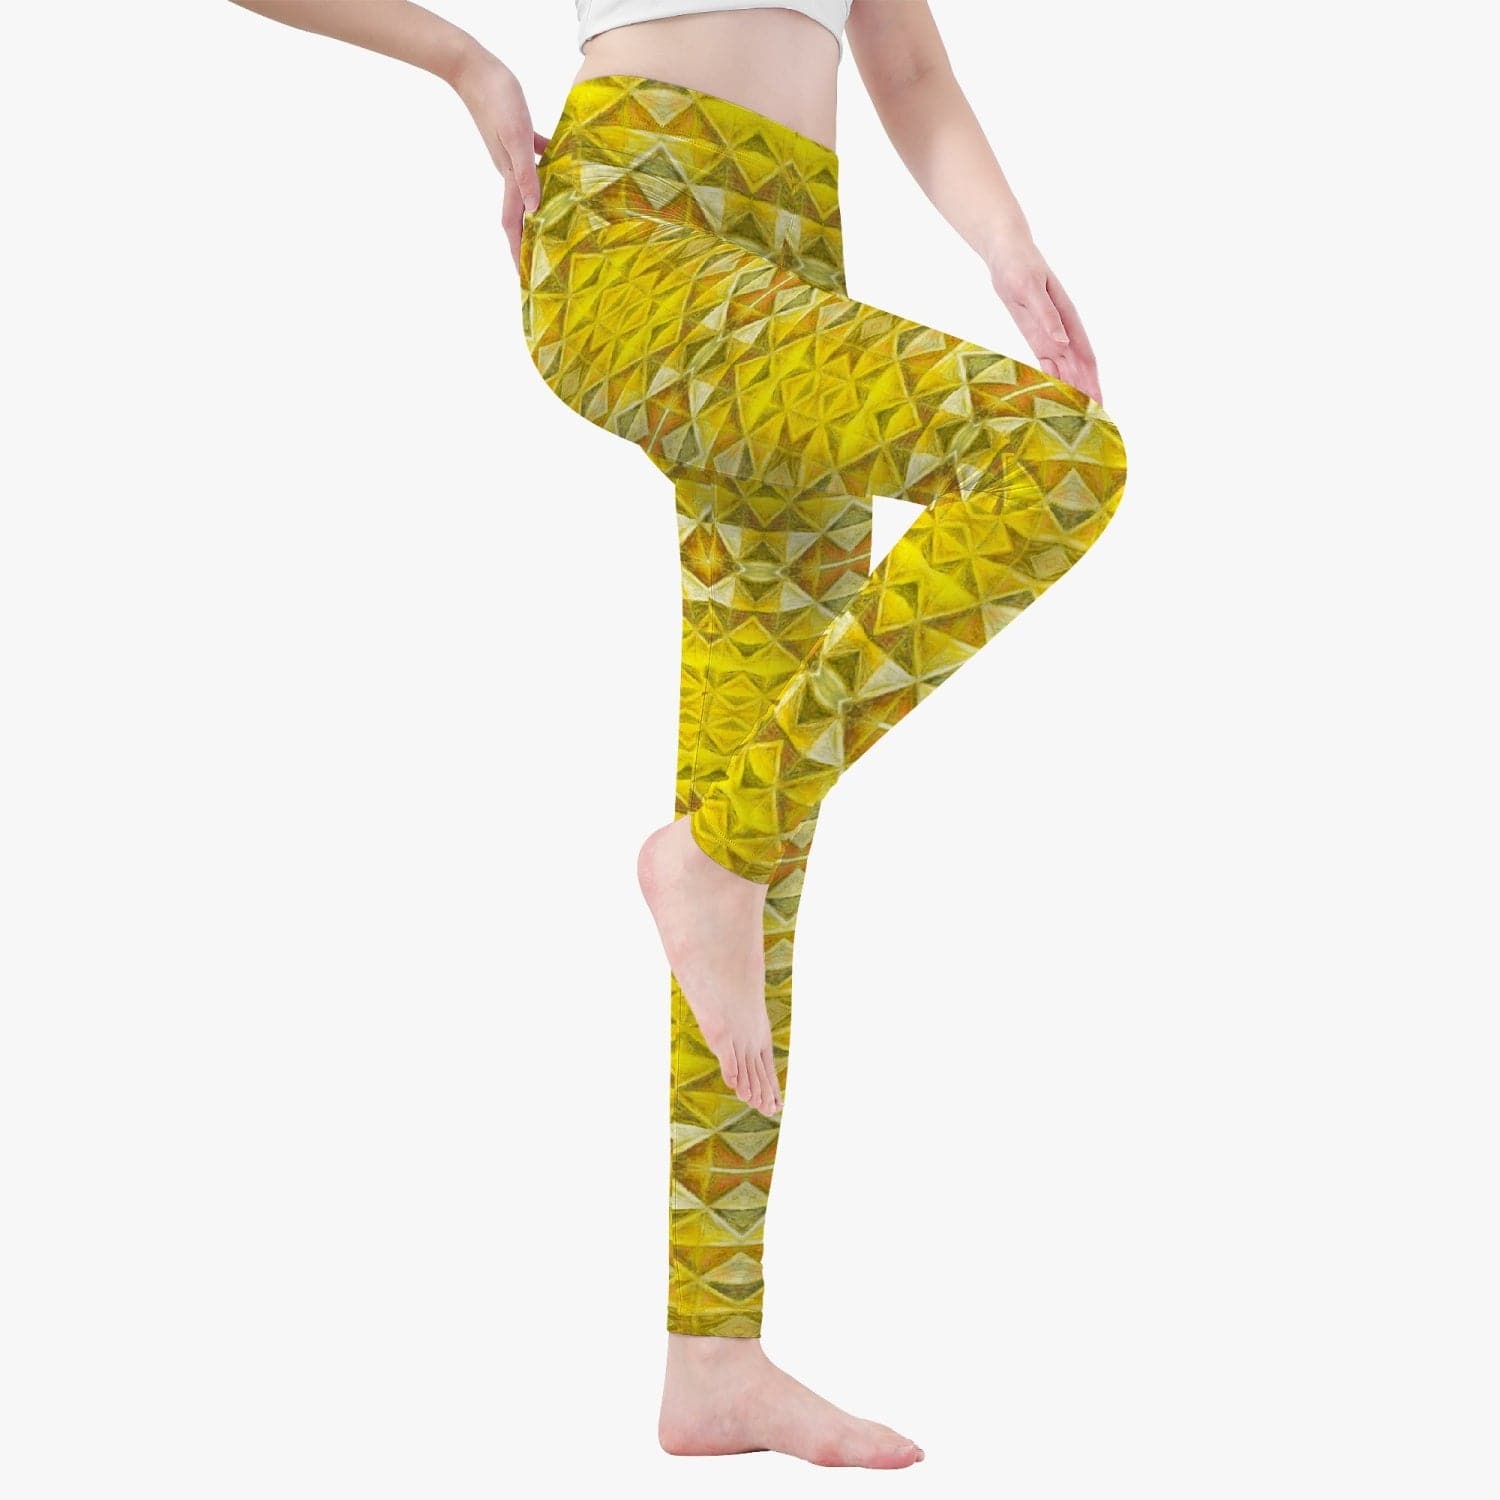 Connecting the True Purpose of Being Yellow Beautiful Patterned Yoga Pants/Leggings for Women